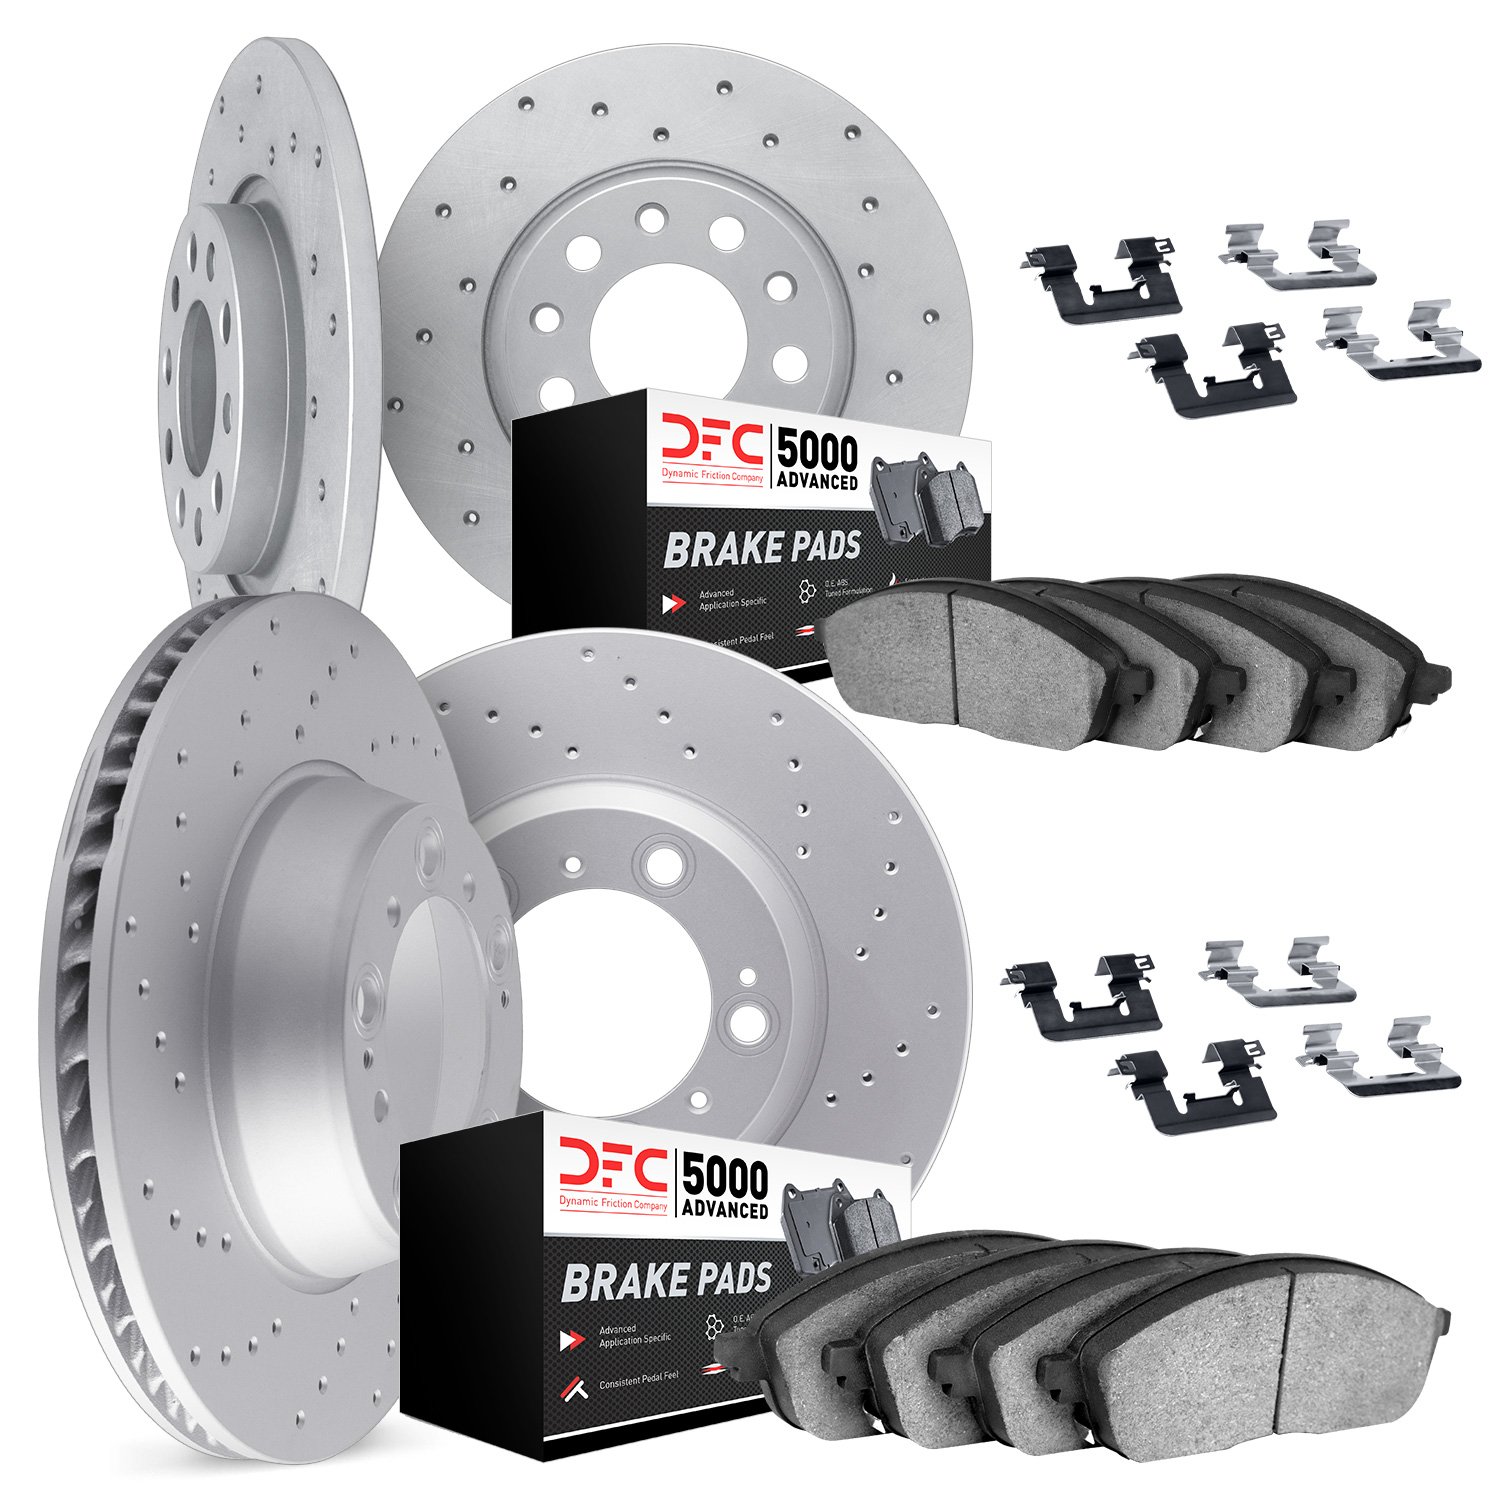 2714-59065 Geoperformance Drilled Brake Rotors with Active Performance Pads Kit & Hardware, 2008-2014 Acura/Honda, Position: Fro